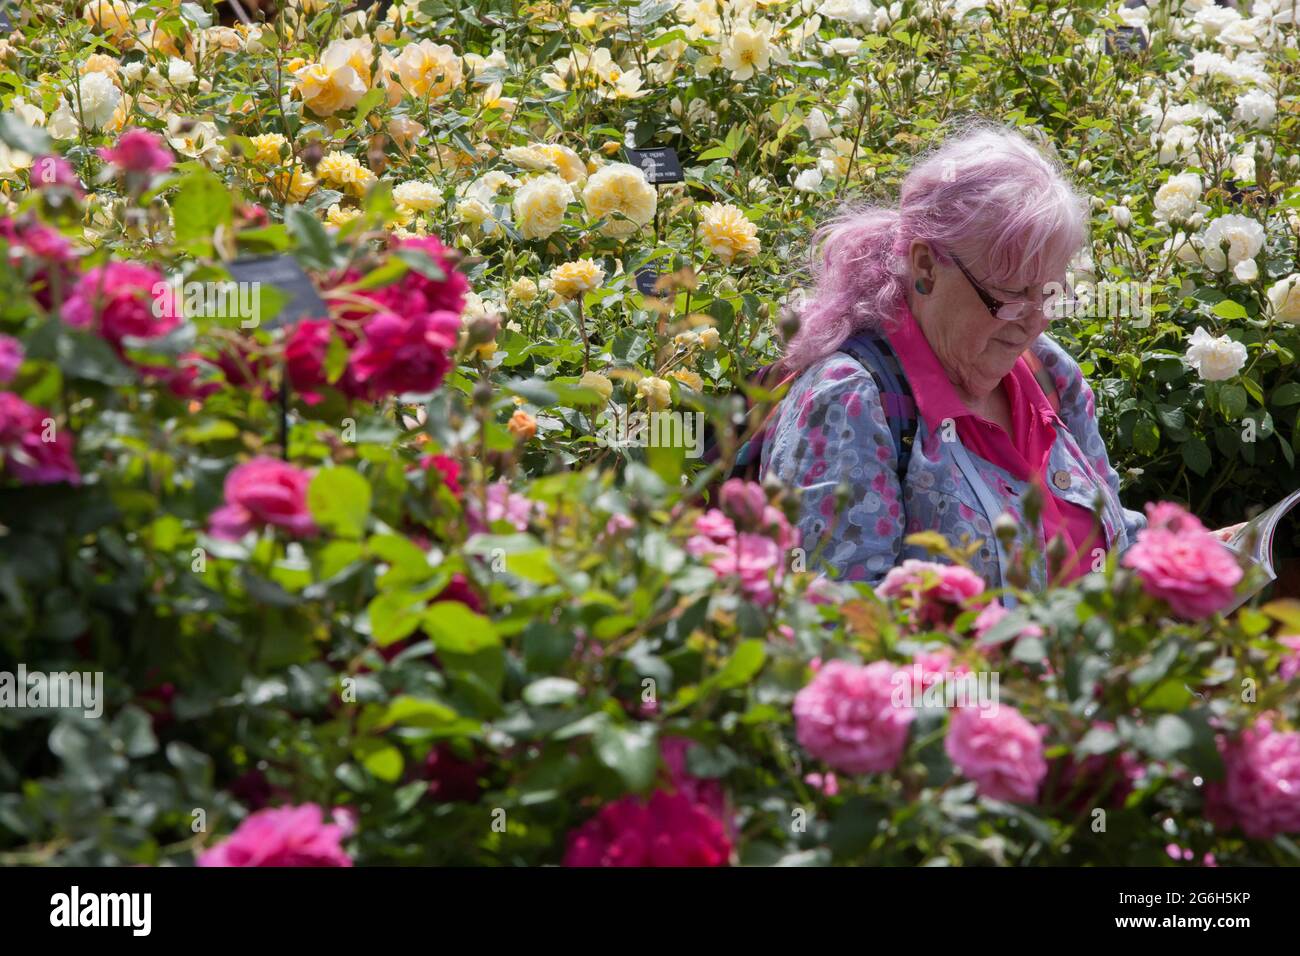 Hampton Court, Surrey, 6 July 2021: Stormy weather made for some wet feet at the RHS Hampton Court Palace Garden Show but a lady with pink hair found a sunny moment to sit amongst the David Austin roses Rainbow of Roses and read the show guide. Rachel Royse/Alamy Live News Stock Photo